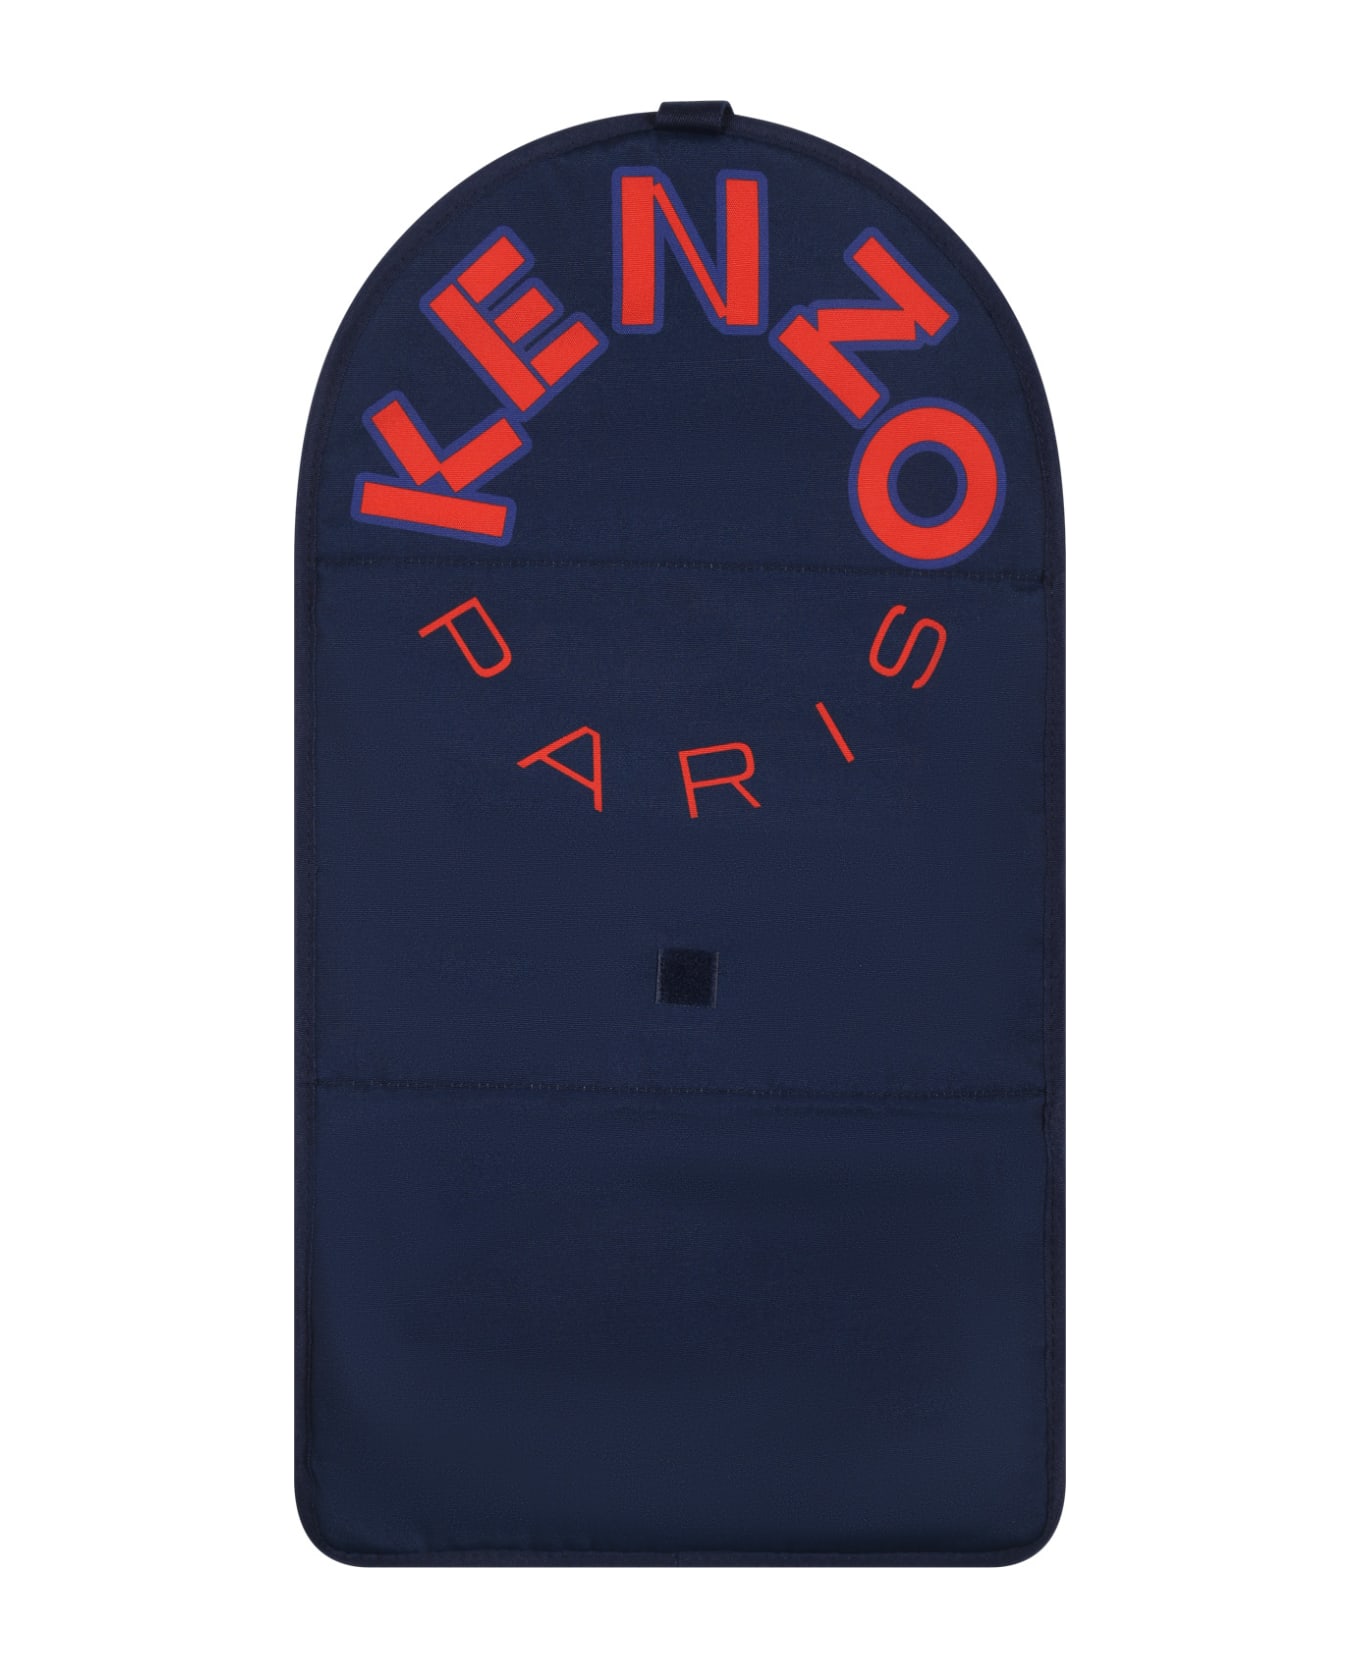 Kenzo Kids Blue Mother Bag For Baby Boy With Logo - Blue アクセサリー＆ギフト